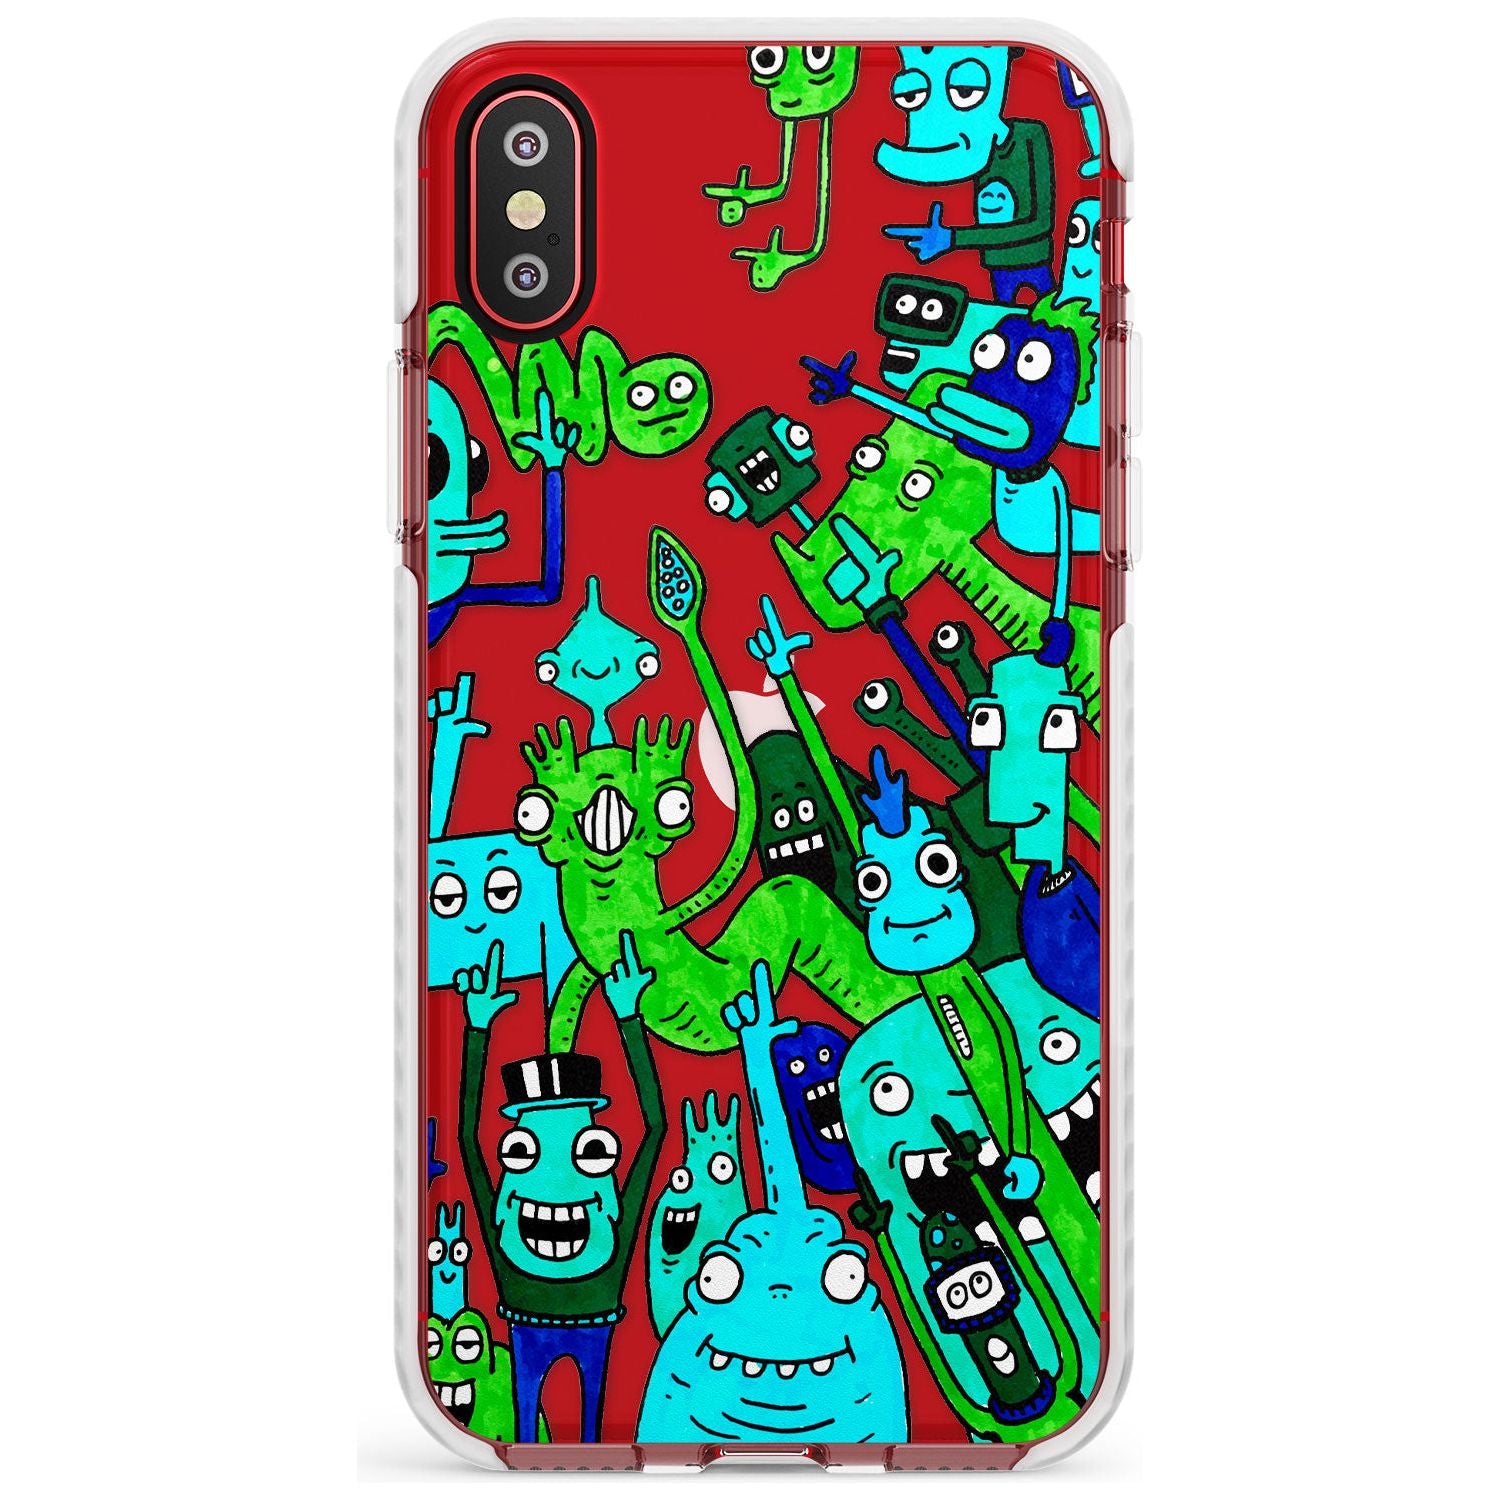 Don't Point Impact Phone Case for iPhone X XS Max XR